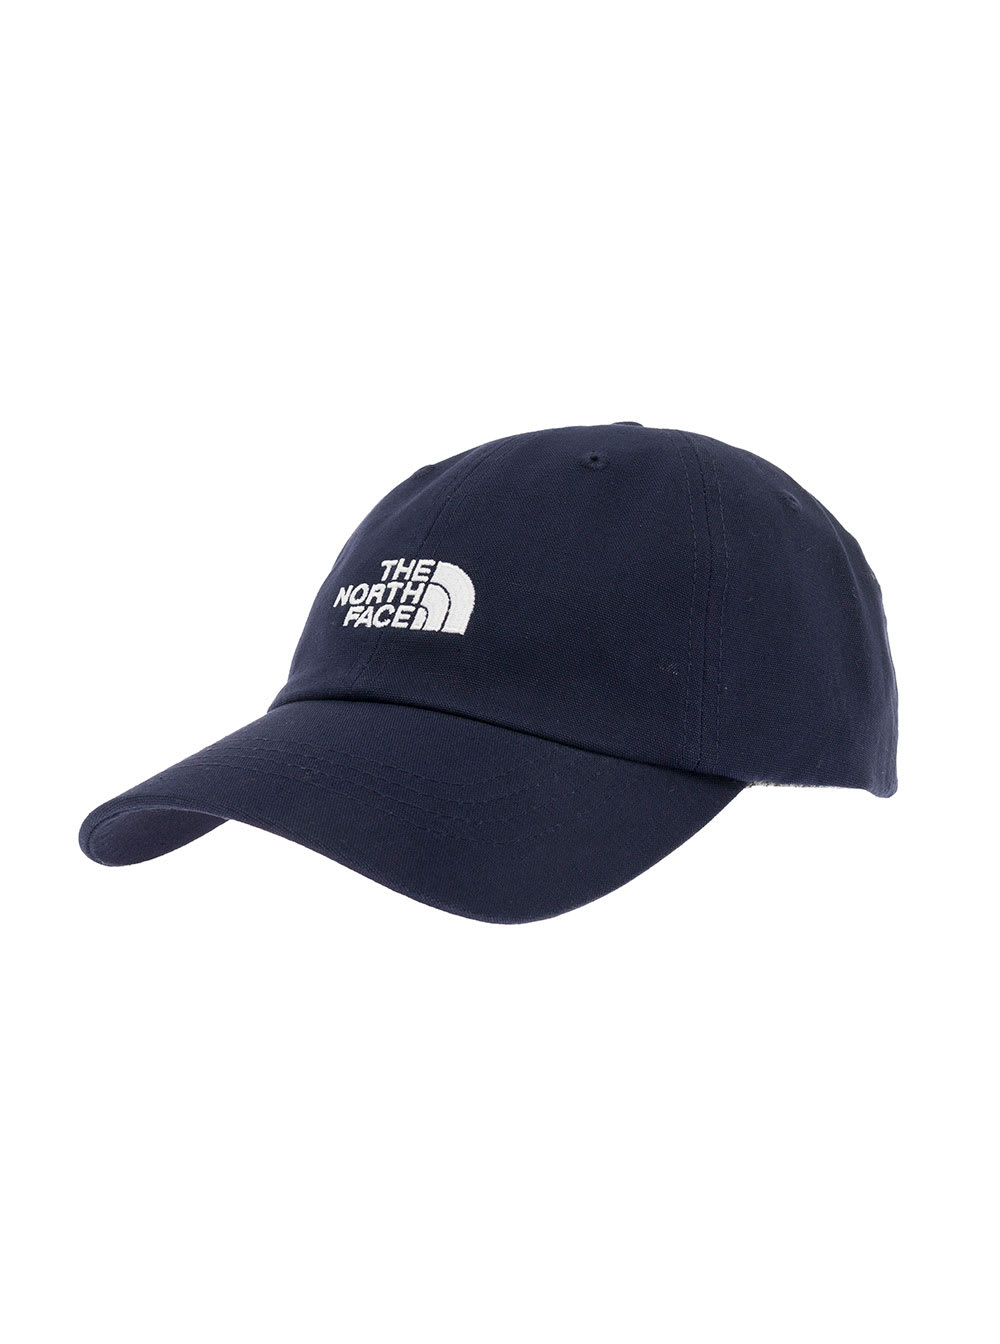 The North Face Mens Norman Blue Cotton Hat With Logo